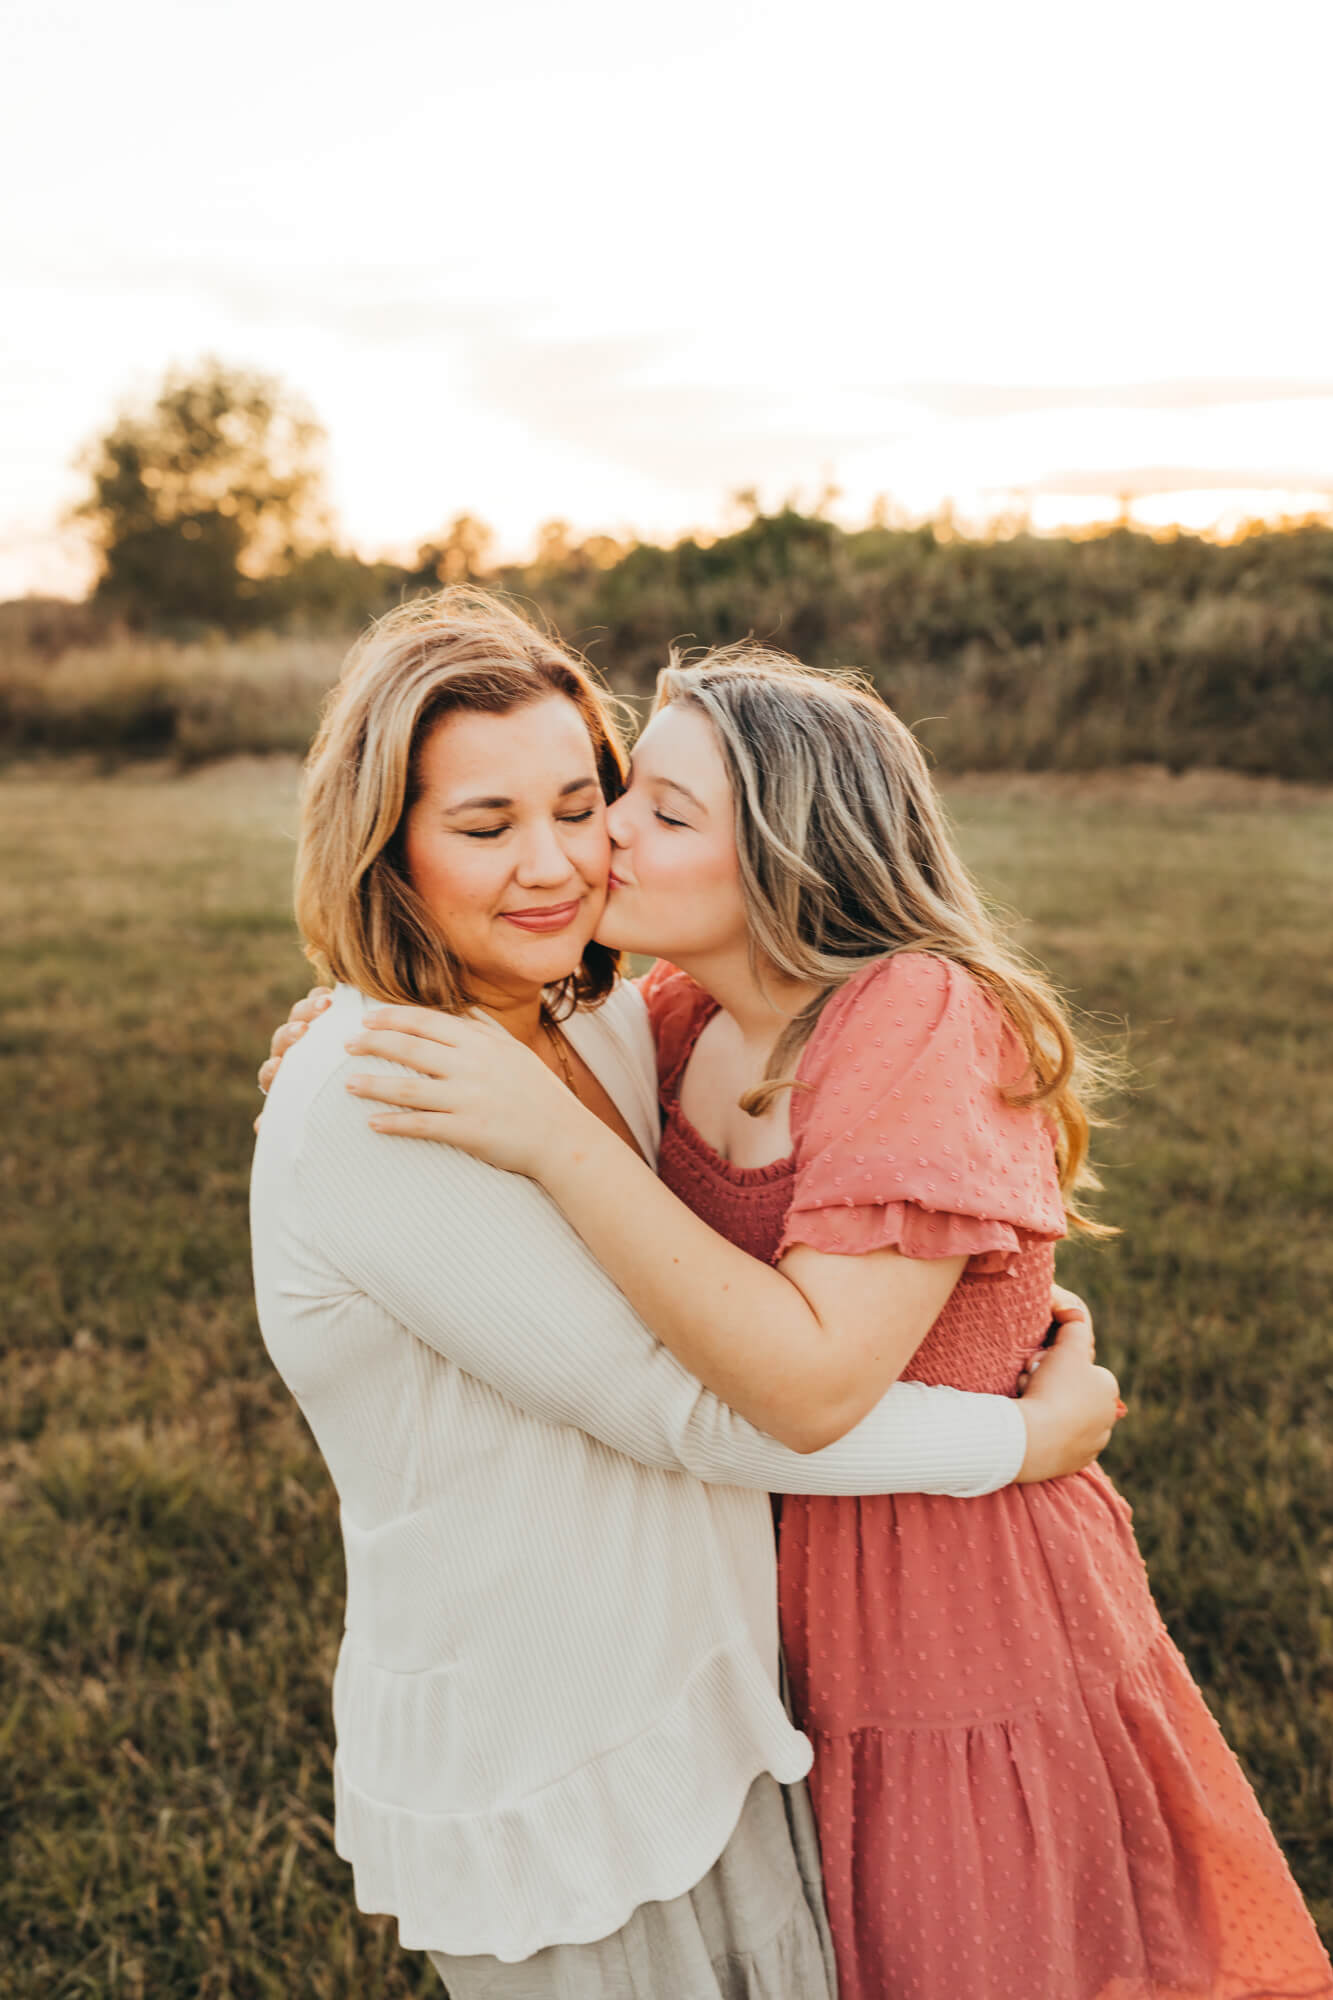 Teen daughter kisses mom on the cheek while mom embraces the love from her after going to Mother's day brunch in houston.